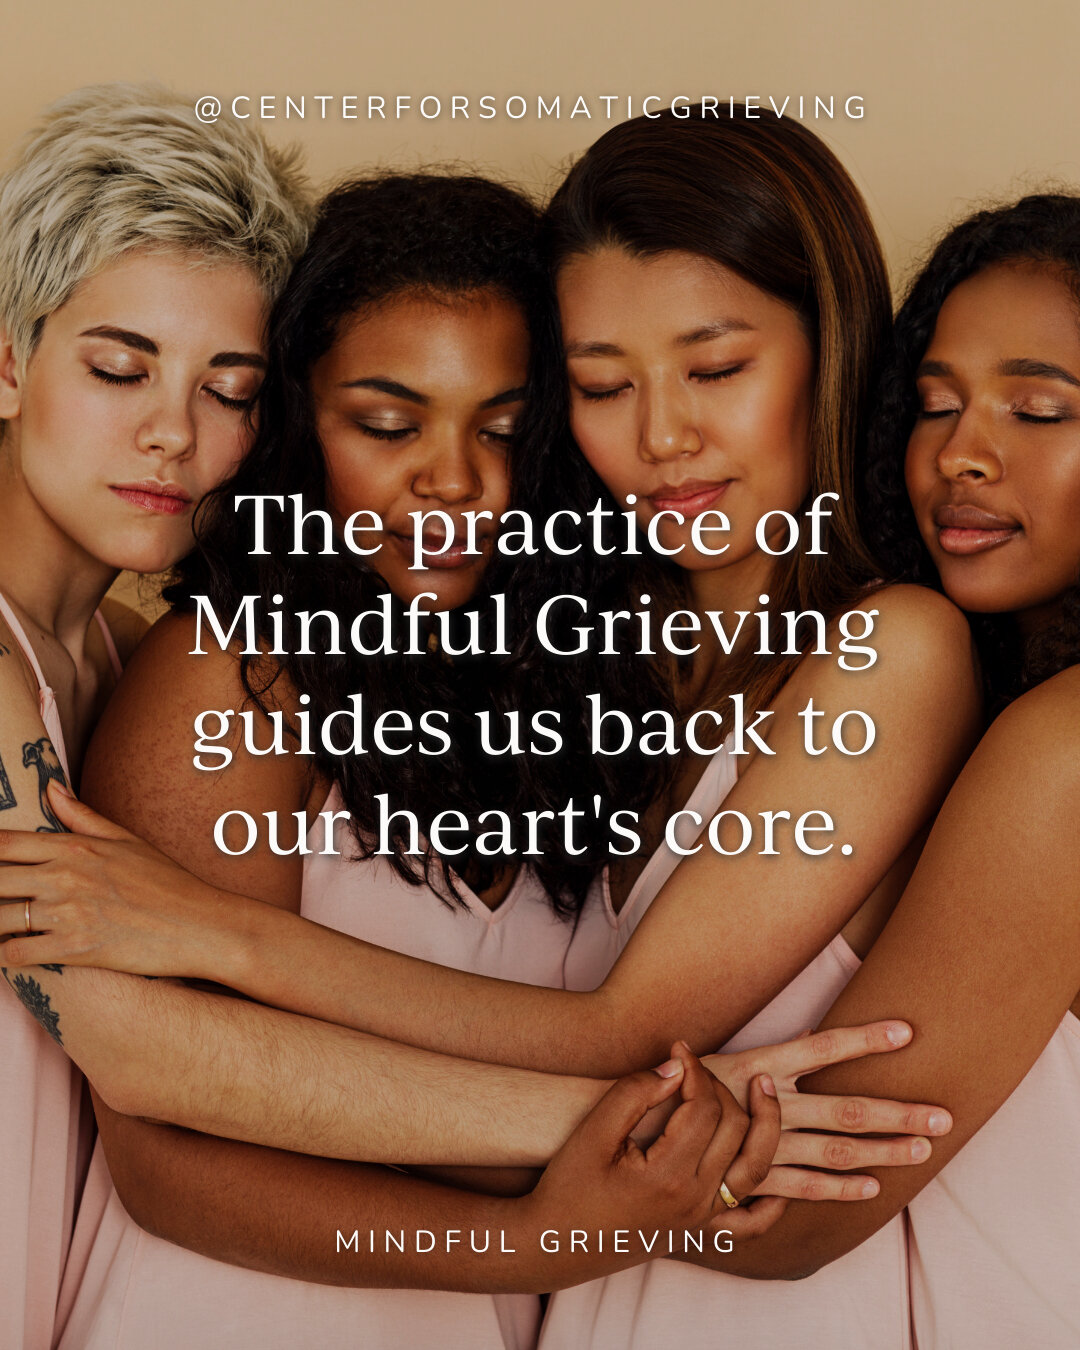 Mindfulness, in its essence, is about presence. When we grieve mindfully, we allow ourselves to fully experience each emotion, understanding its source and impact. This deep dive into our emotional landscape, though challenging, guides us back to the